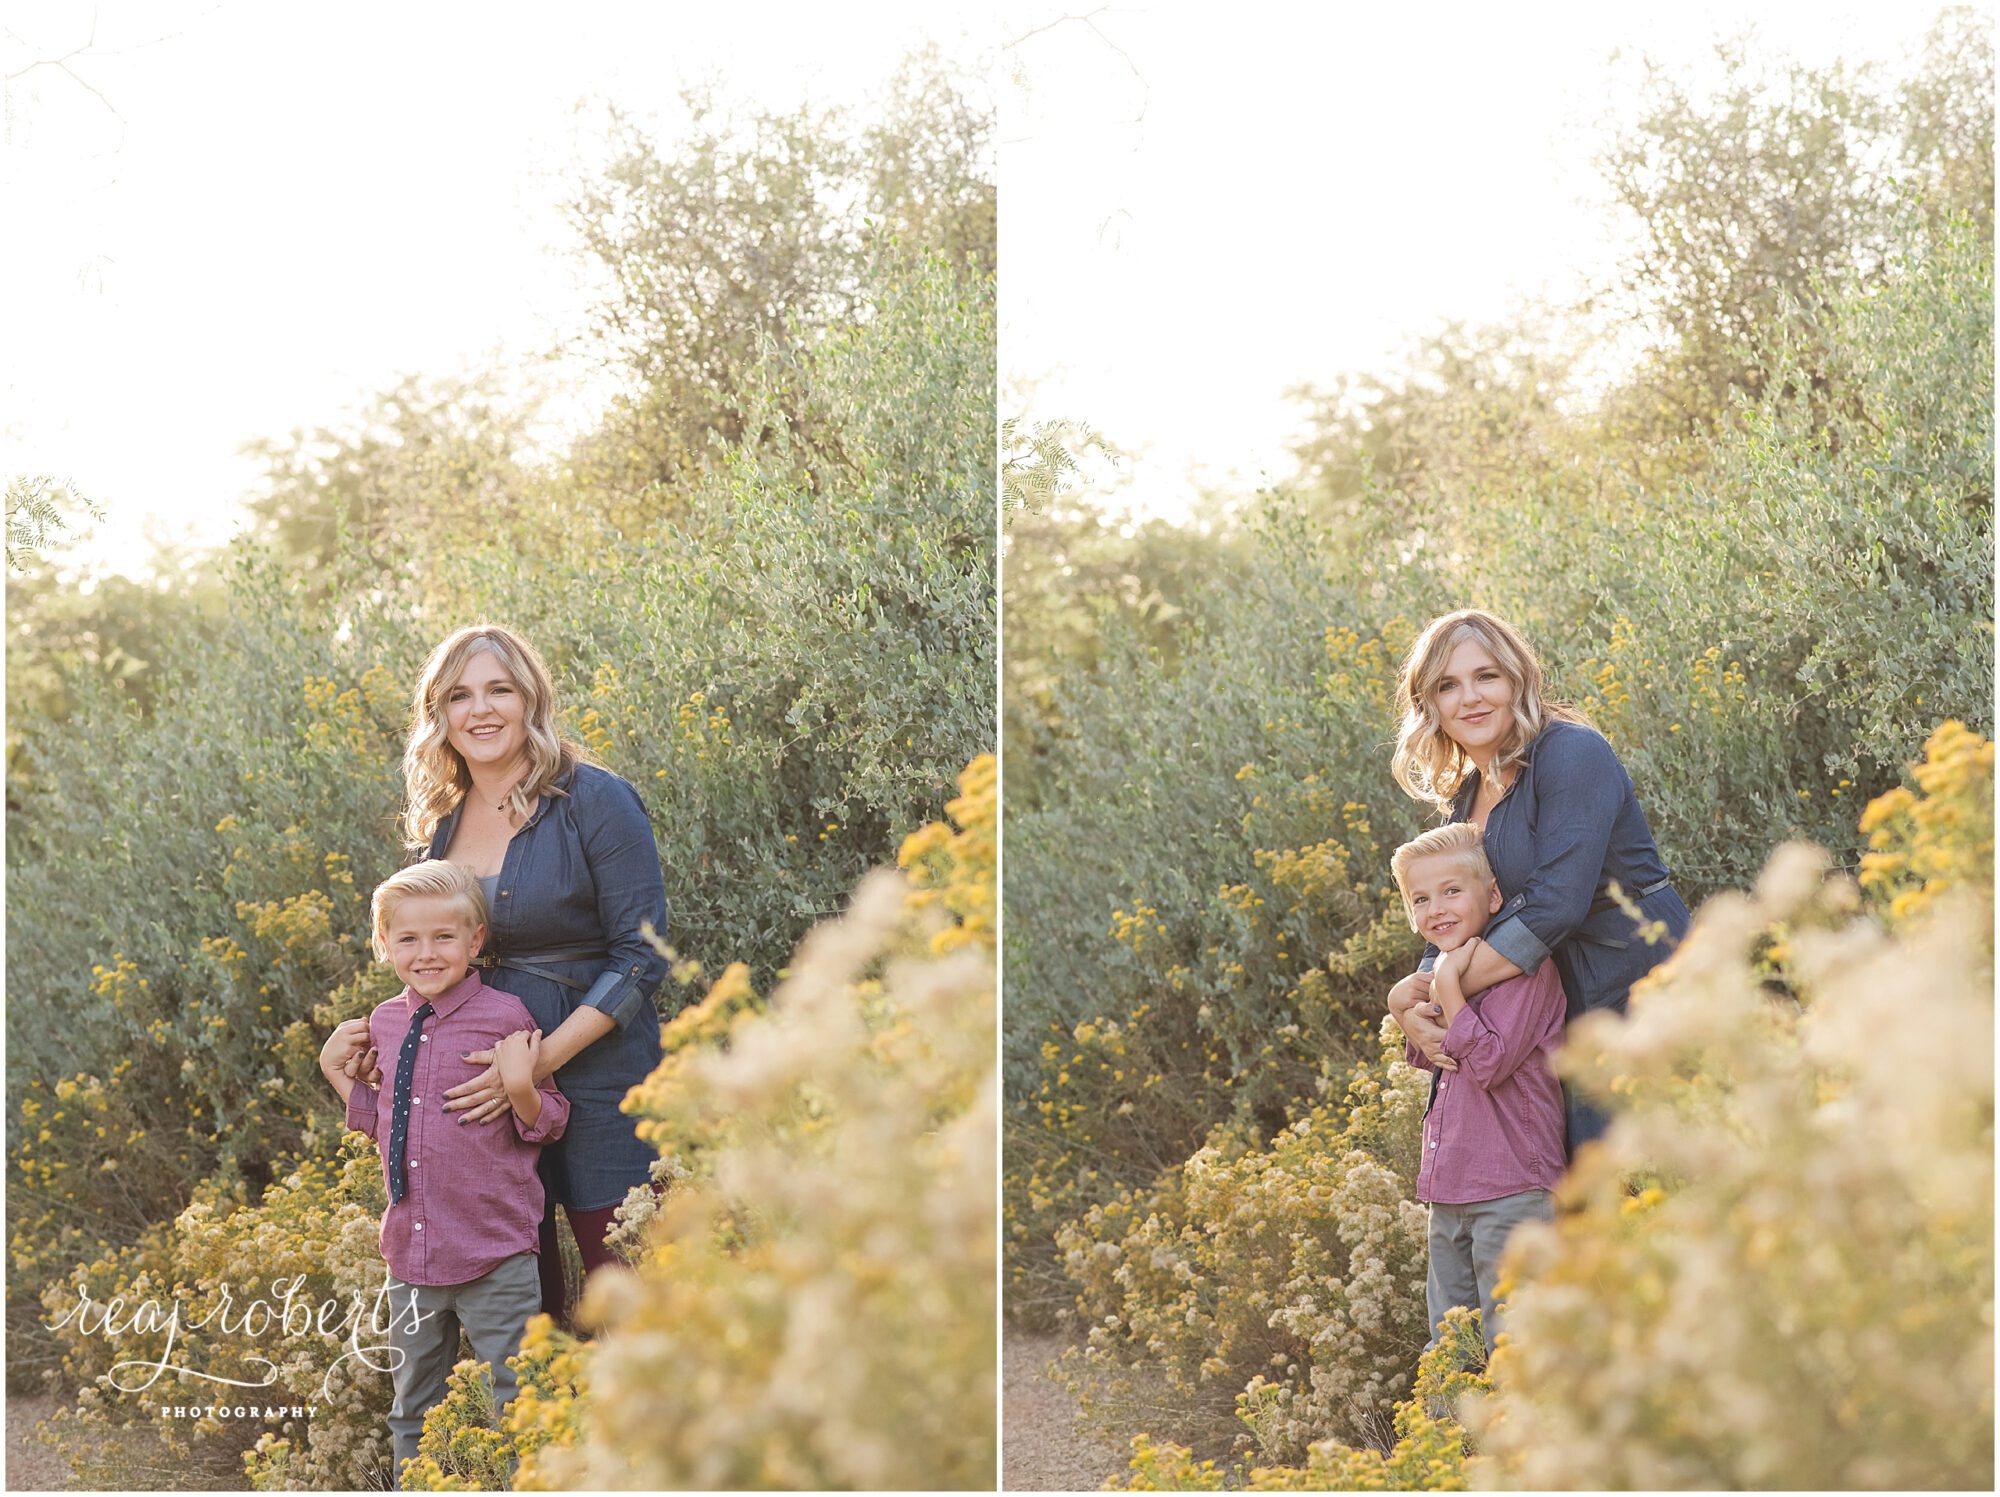 Mother and son poses | Reaj Roberts Photography